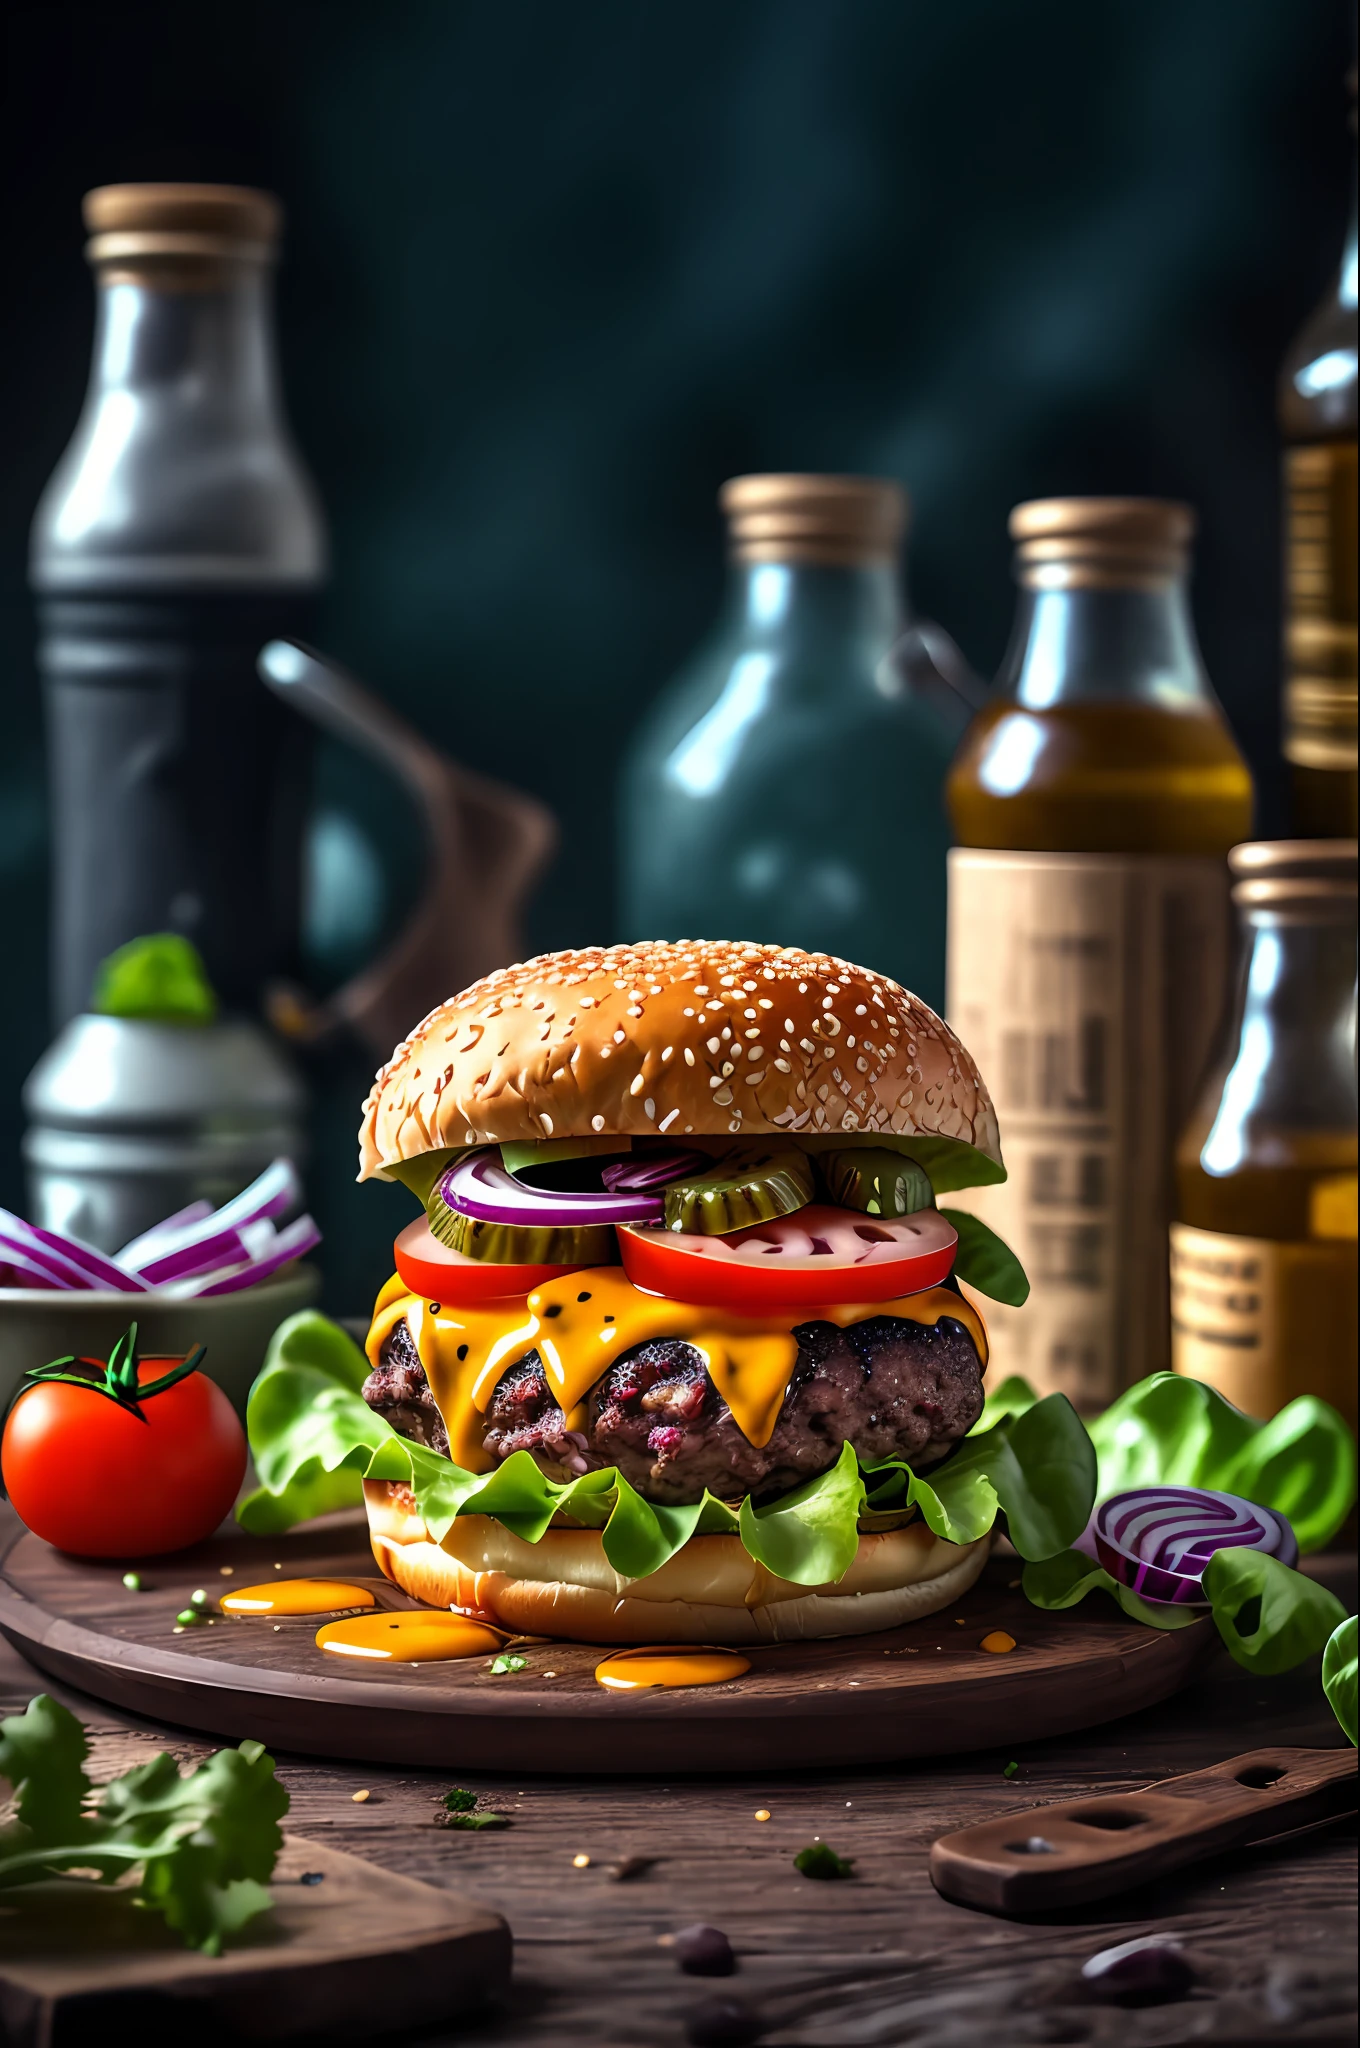 masterpiece, best quality,burger photo, food, food focus, no humans, tomato, blurry, still life, realistic, burger, cup, lettuce, fruit, onion, bowl, depth of field, vegetable, blurry background, cheese, bottle